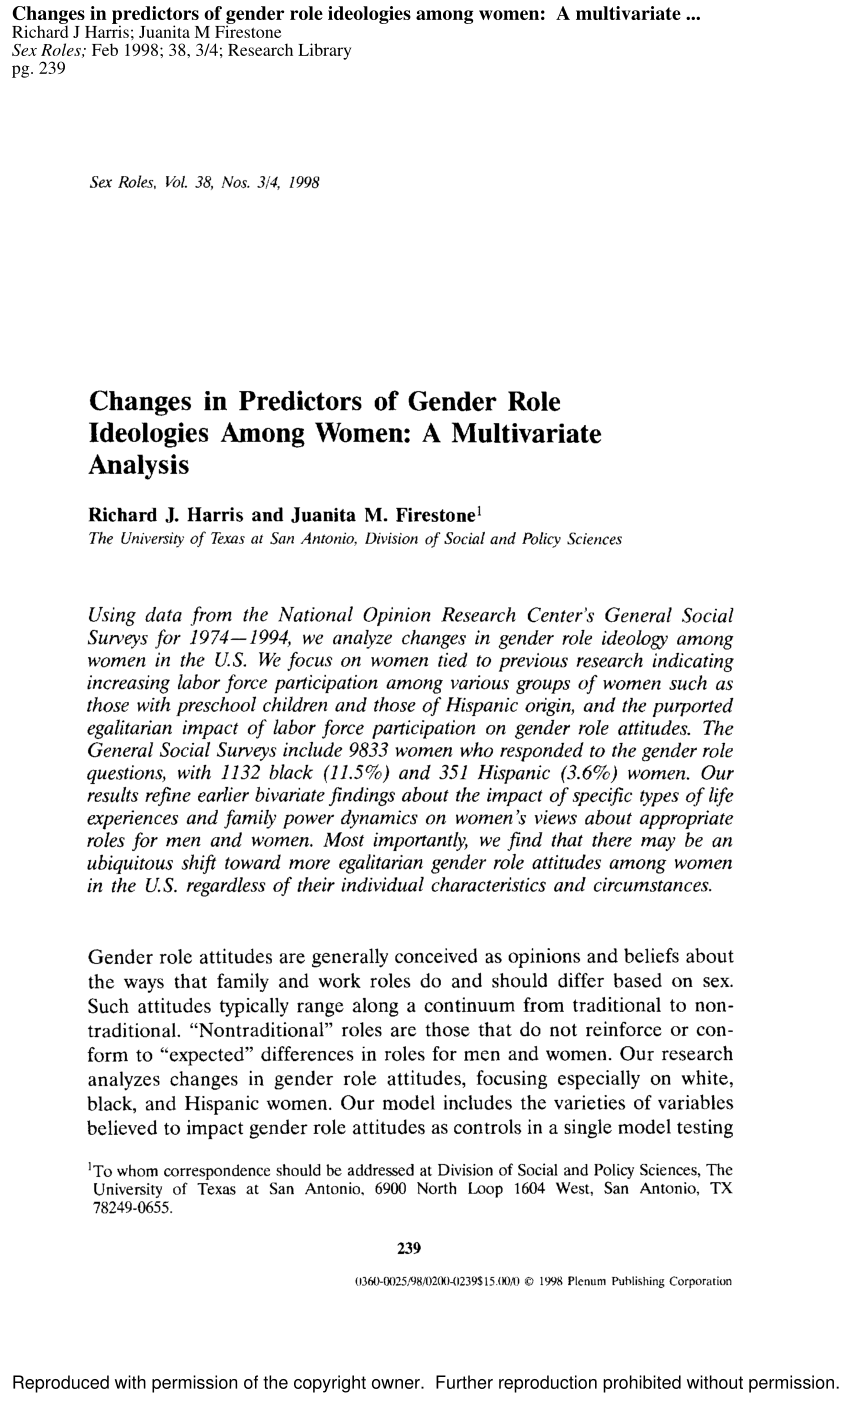 PDF) Changes in Predictors of Gender Role Ideologies Among Women A Multivariate Analysis image